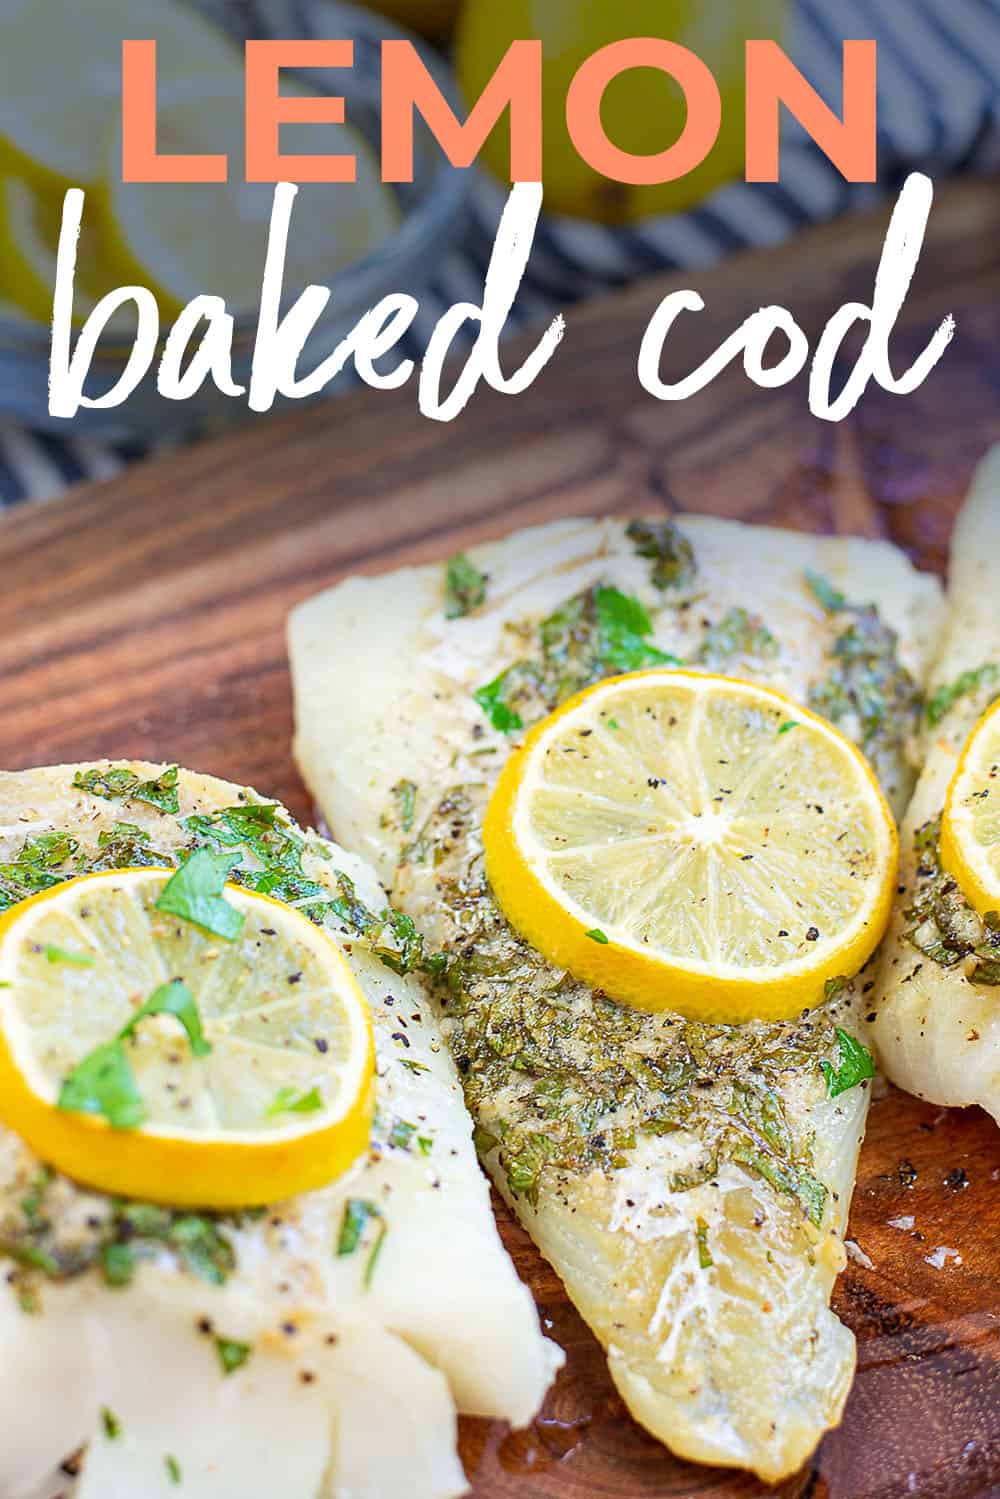 lemon baked cod with text for Pinterest.